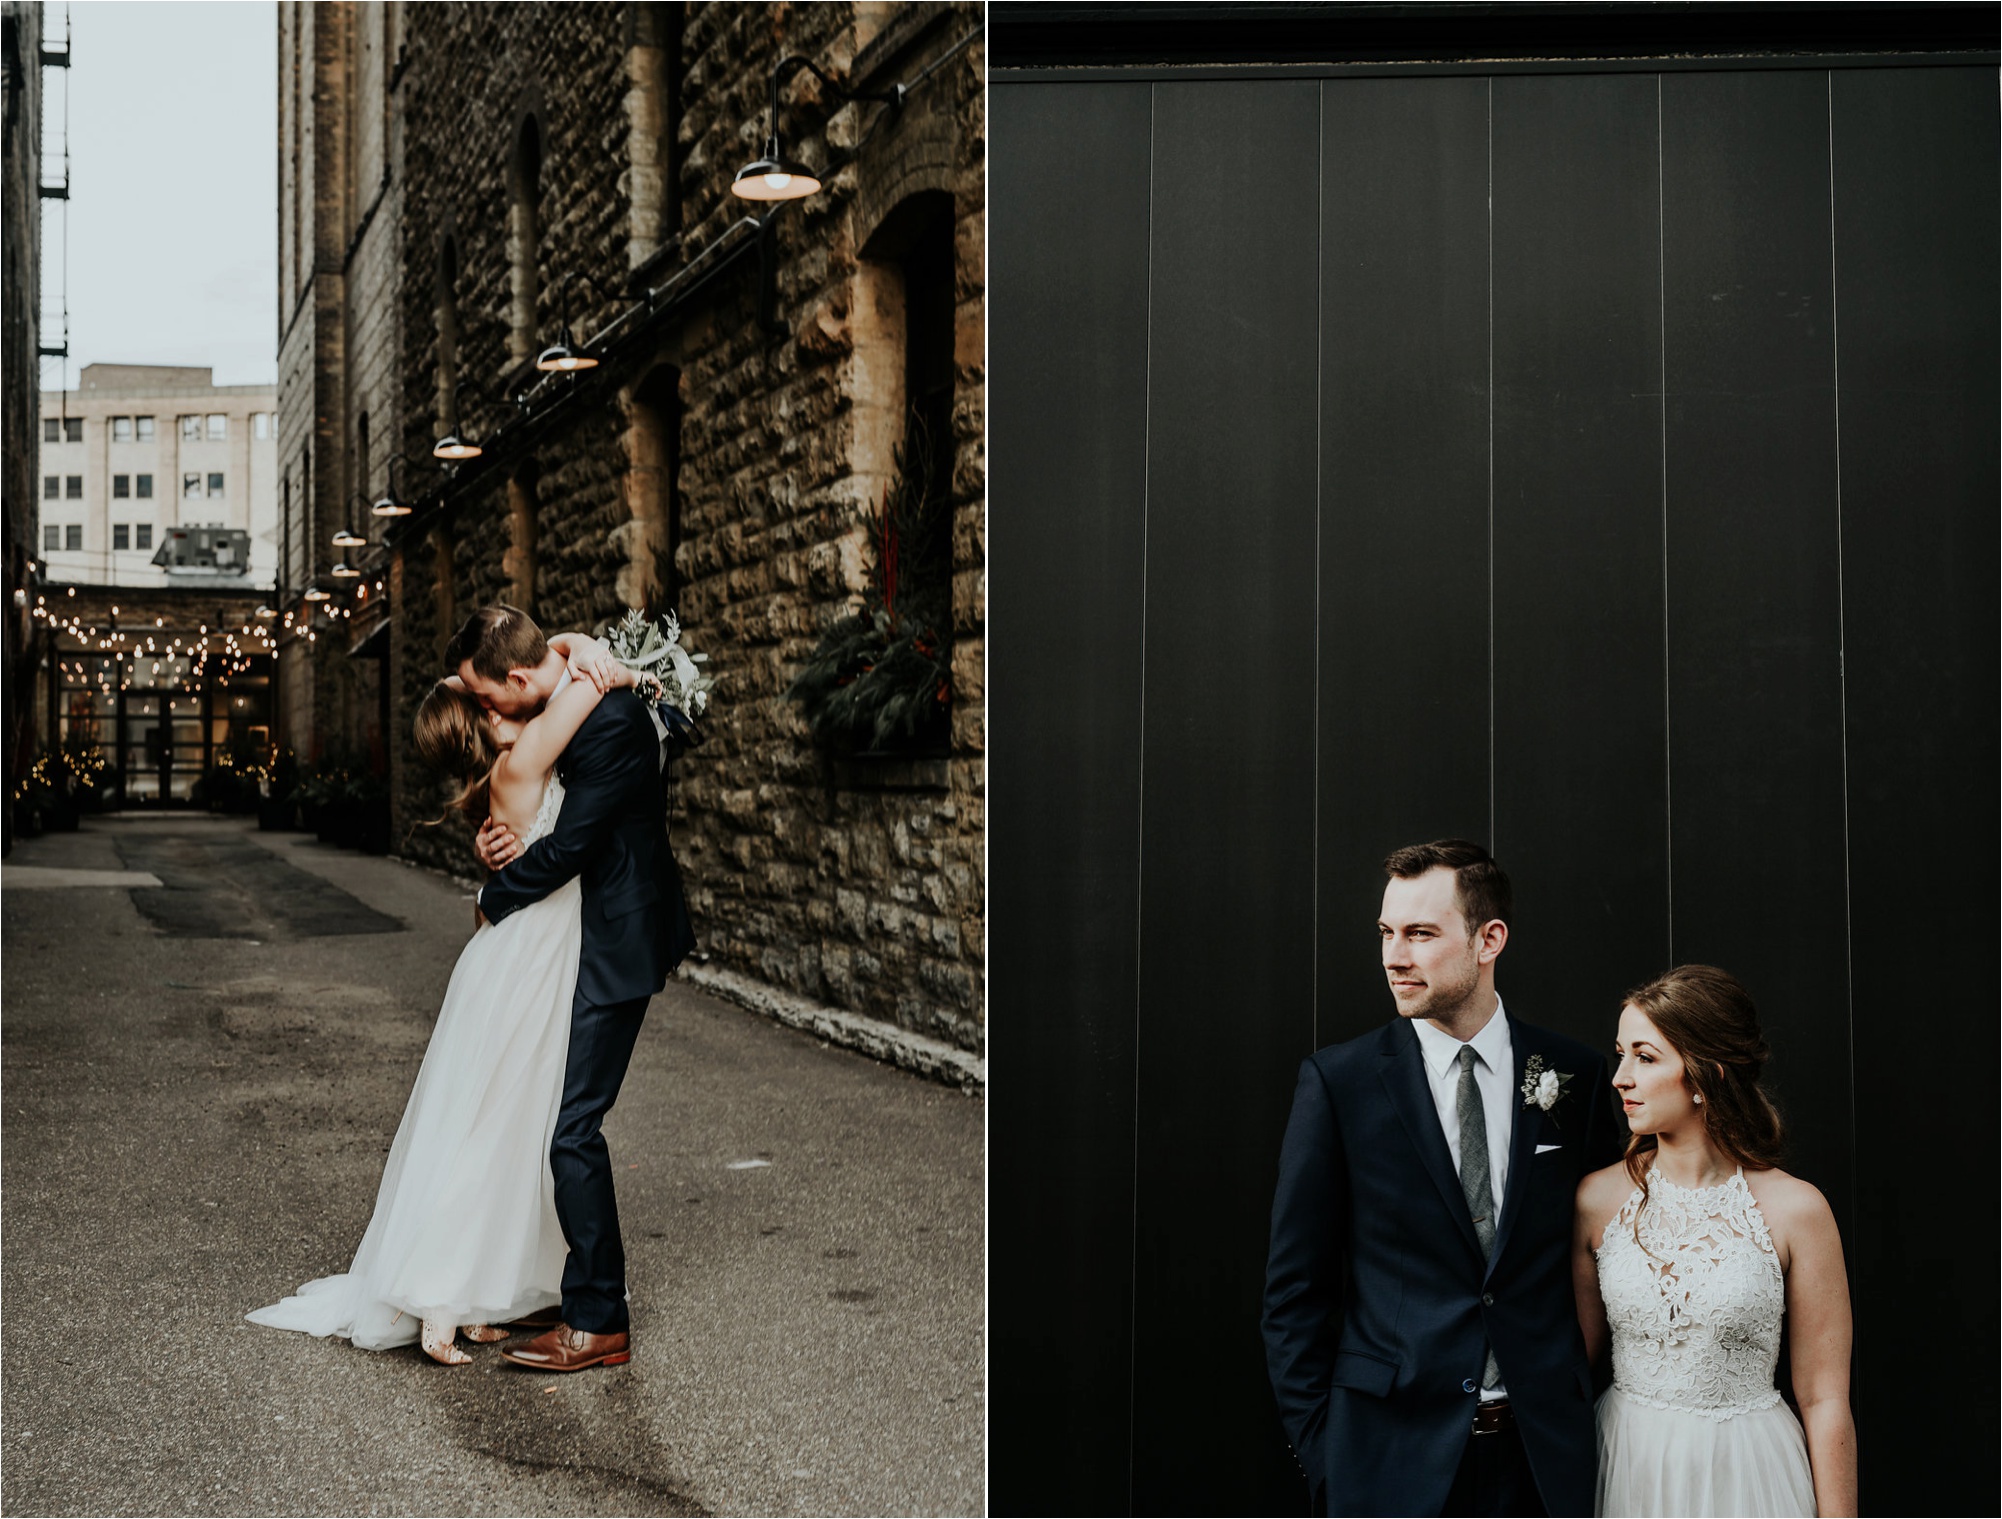 Hewing Hotel and Day Block Event Center Minneapolis Wedding Photographer_2975.jpg